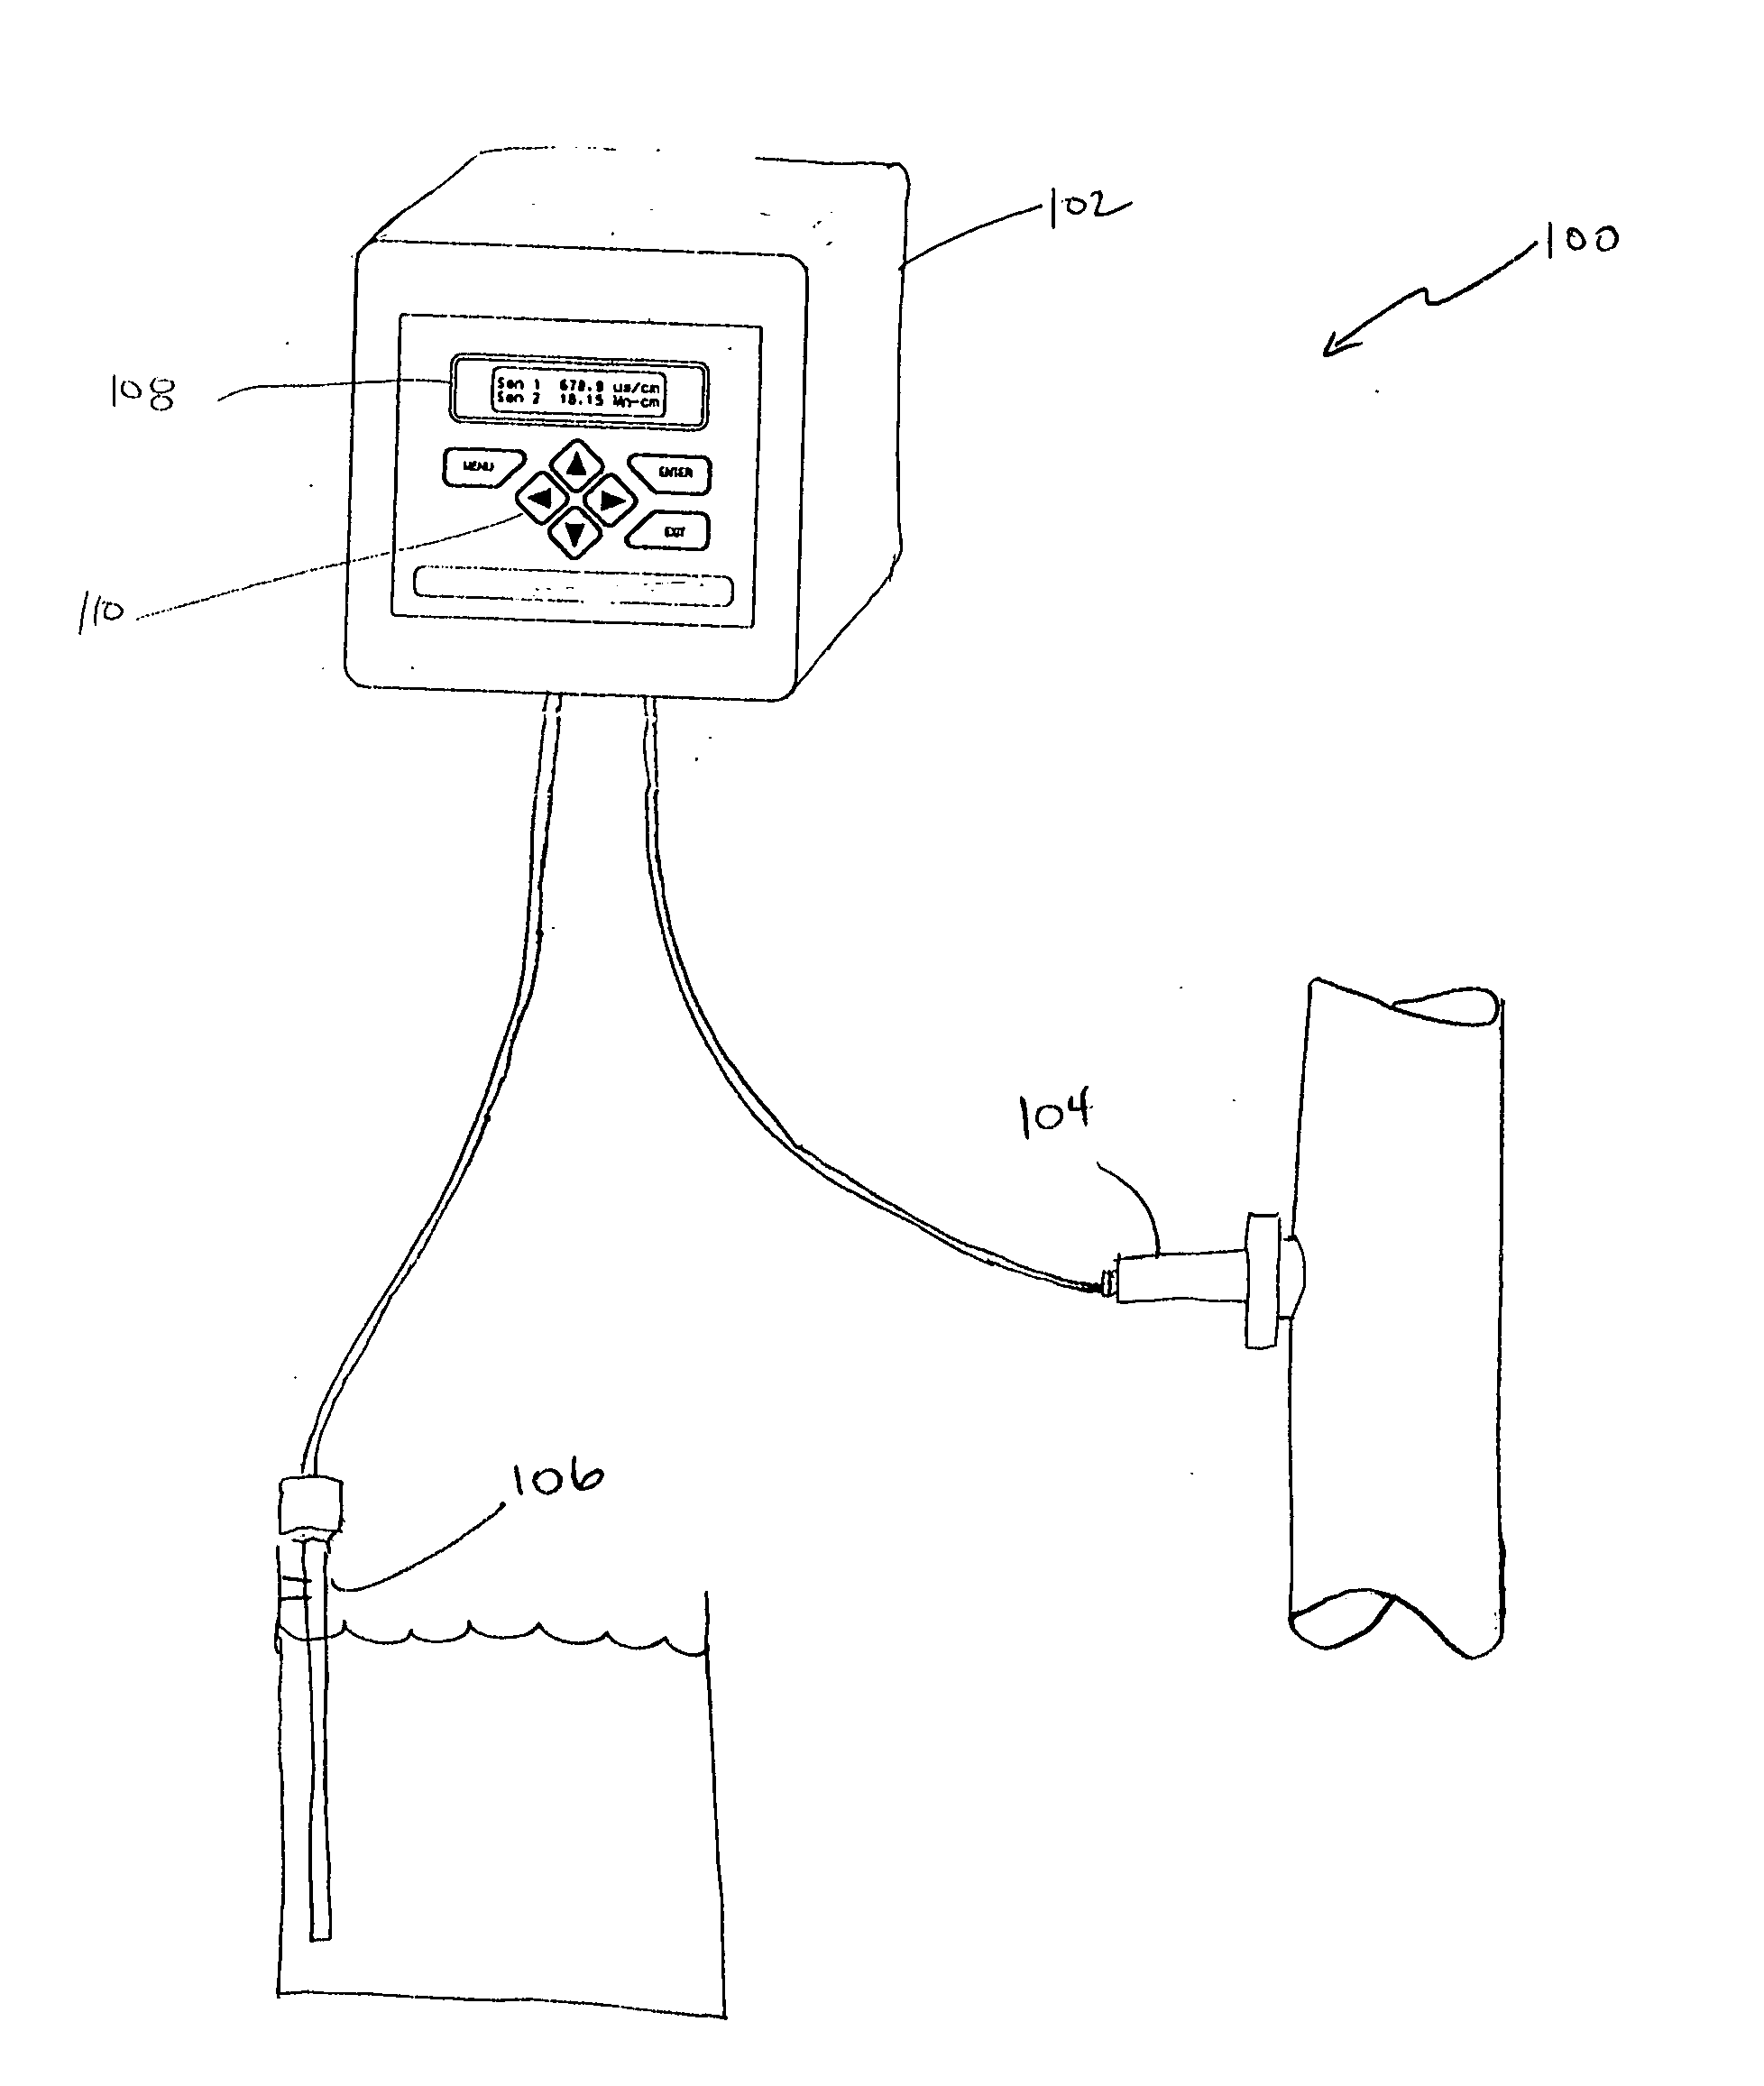 Turbidity sensing system with reduced temperature effects